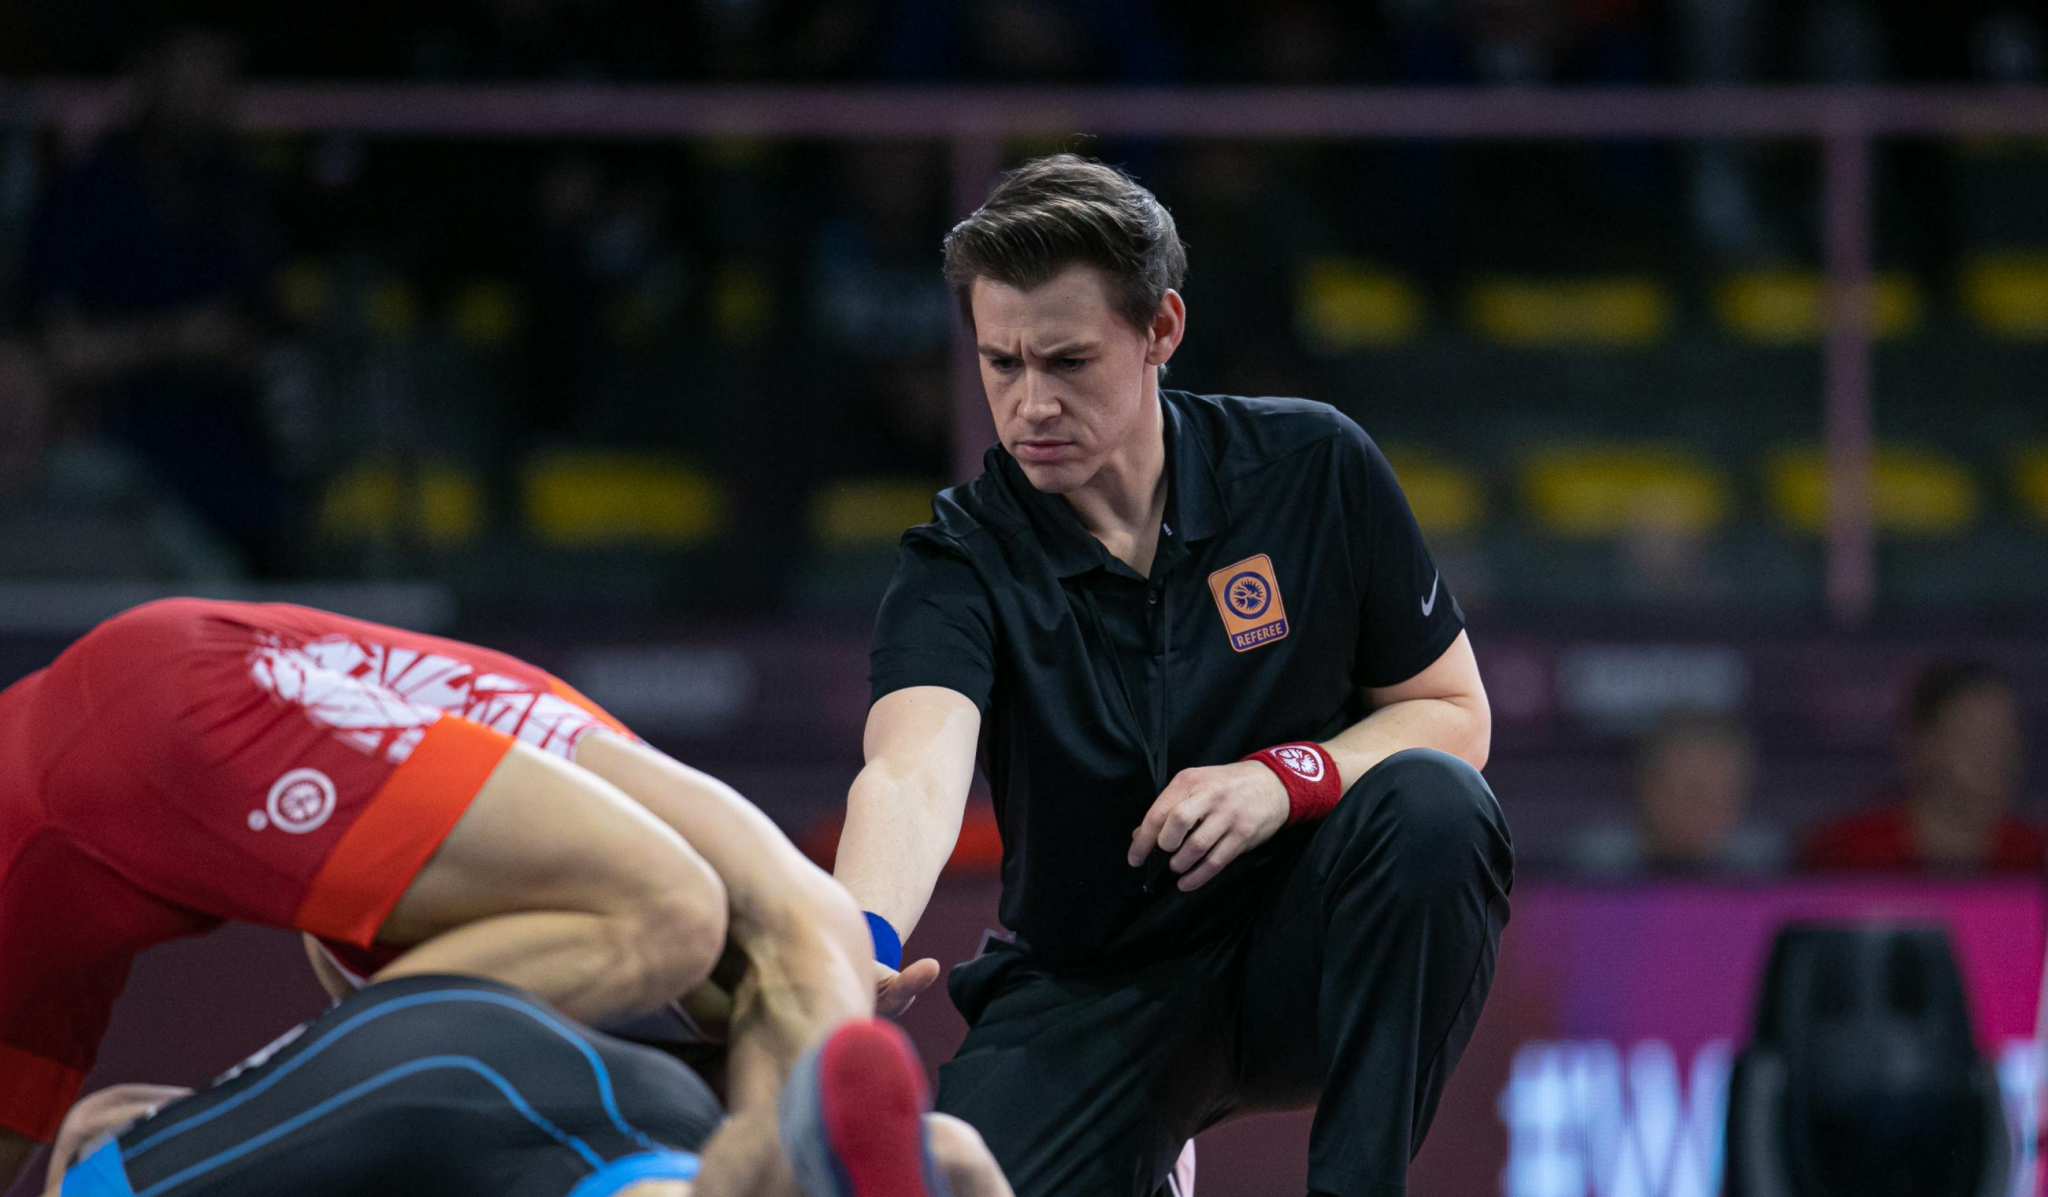 UWW has introduced a referee programme aimed at helping to prevent injuries ©UWW